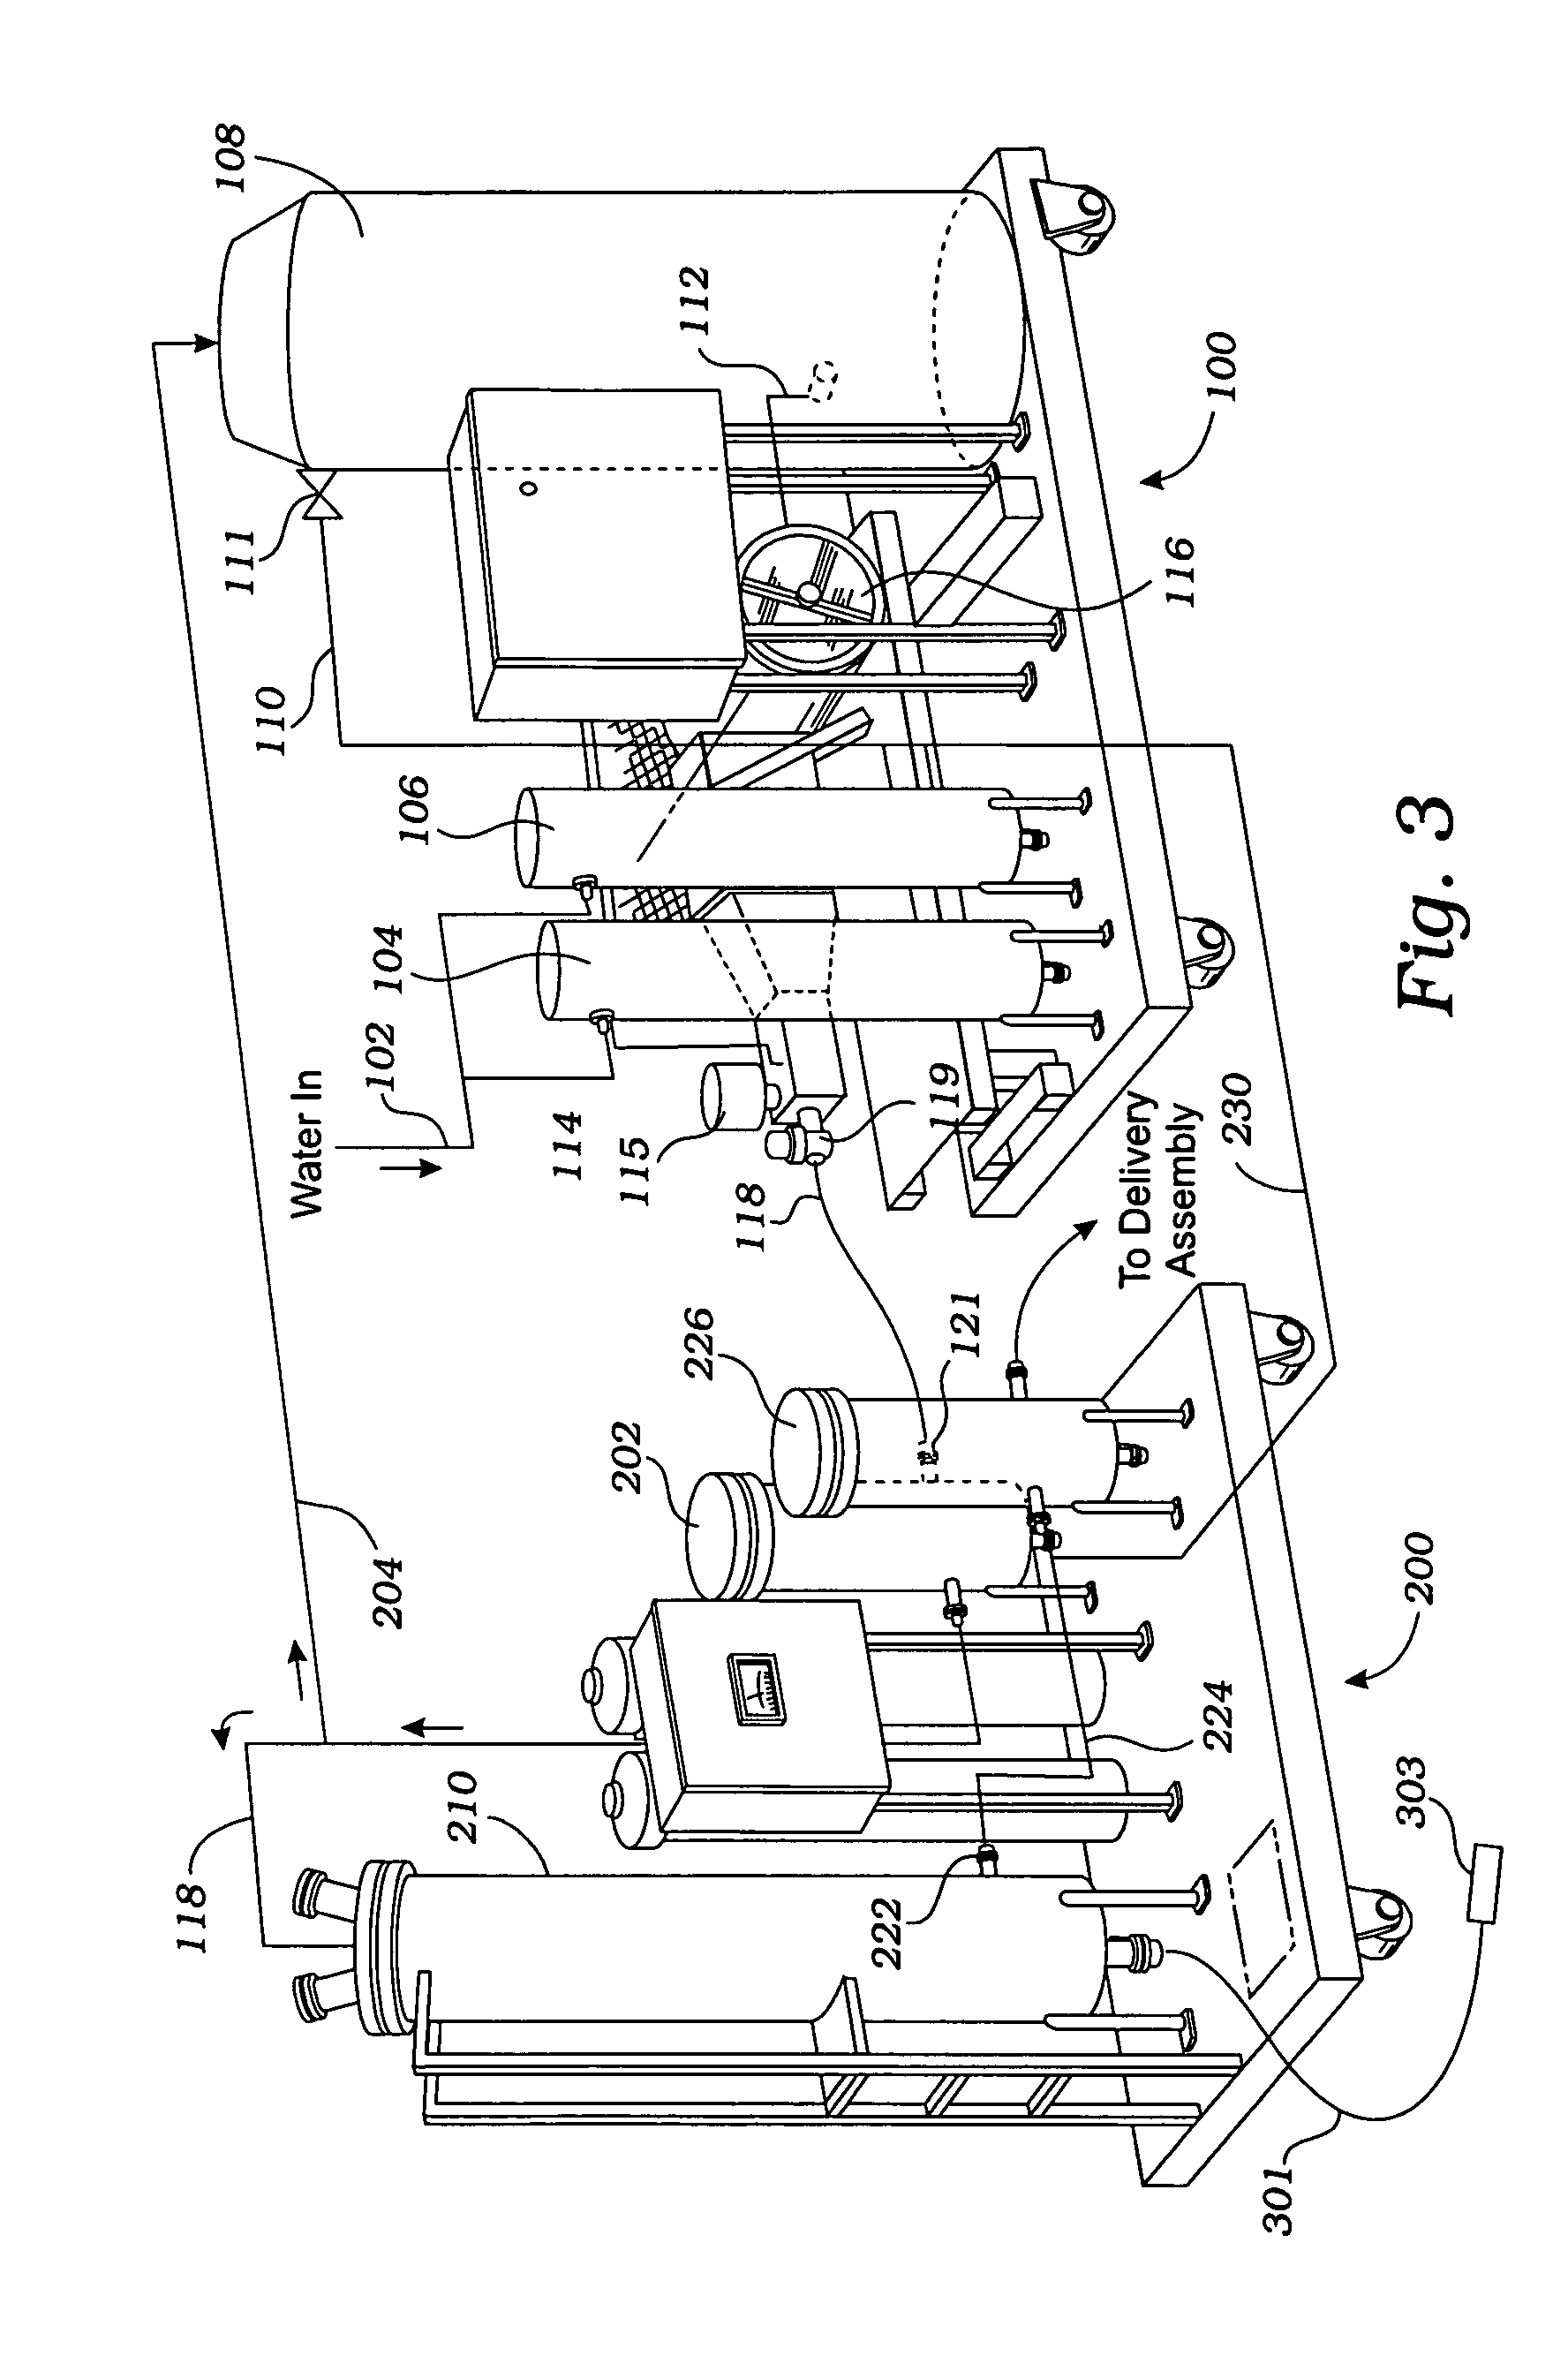 Apparatus for oxygenating wastewater